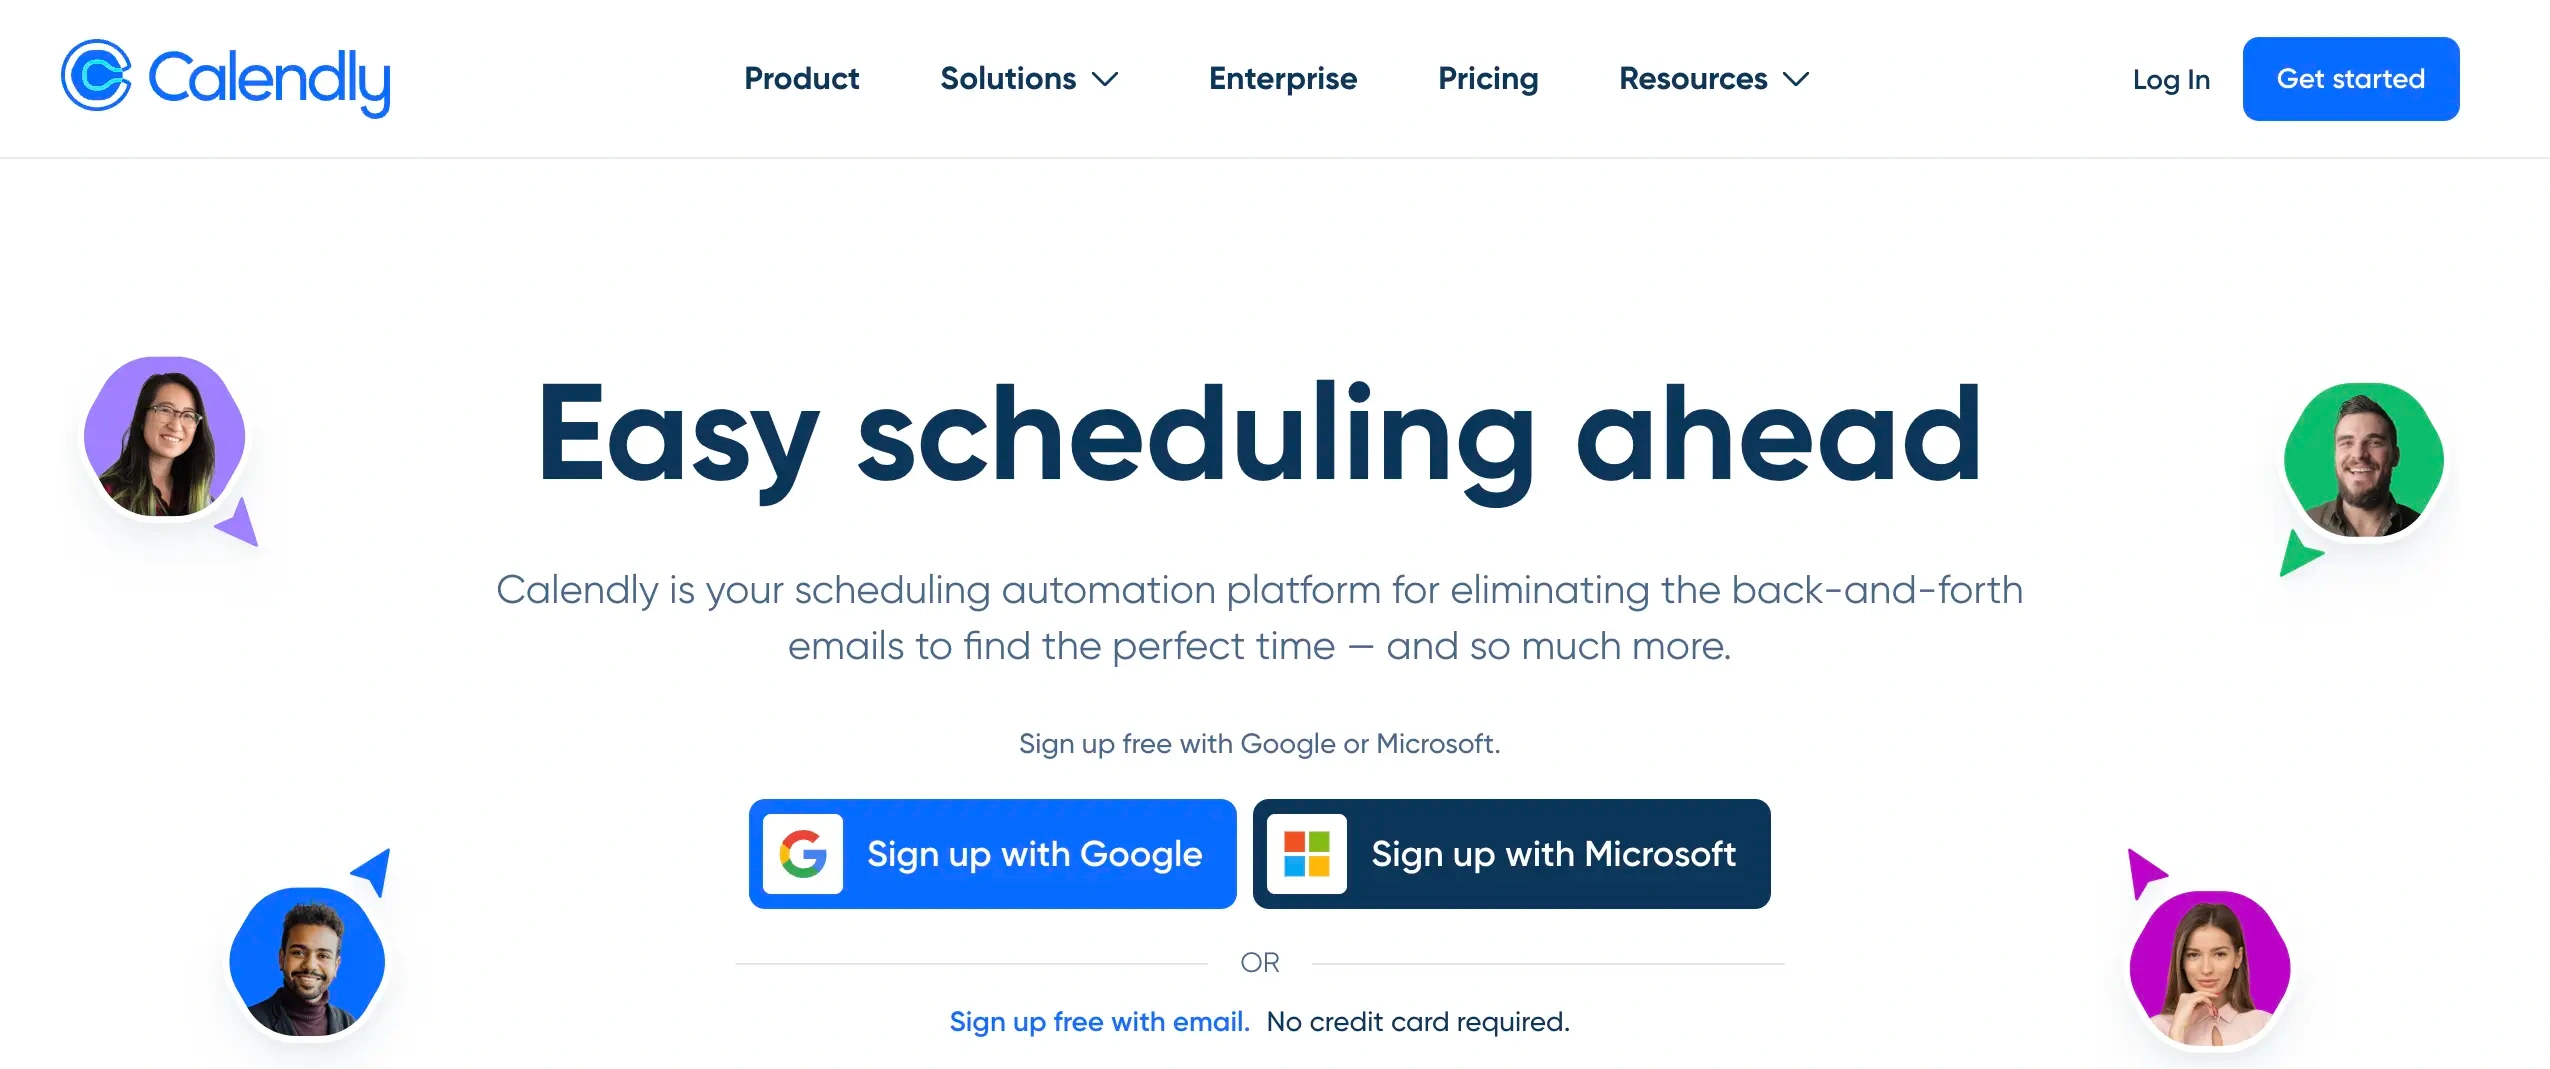 Calendly scheduling automation platform